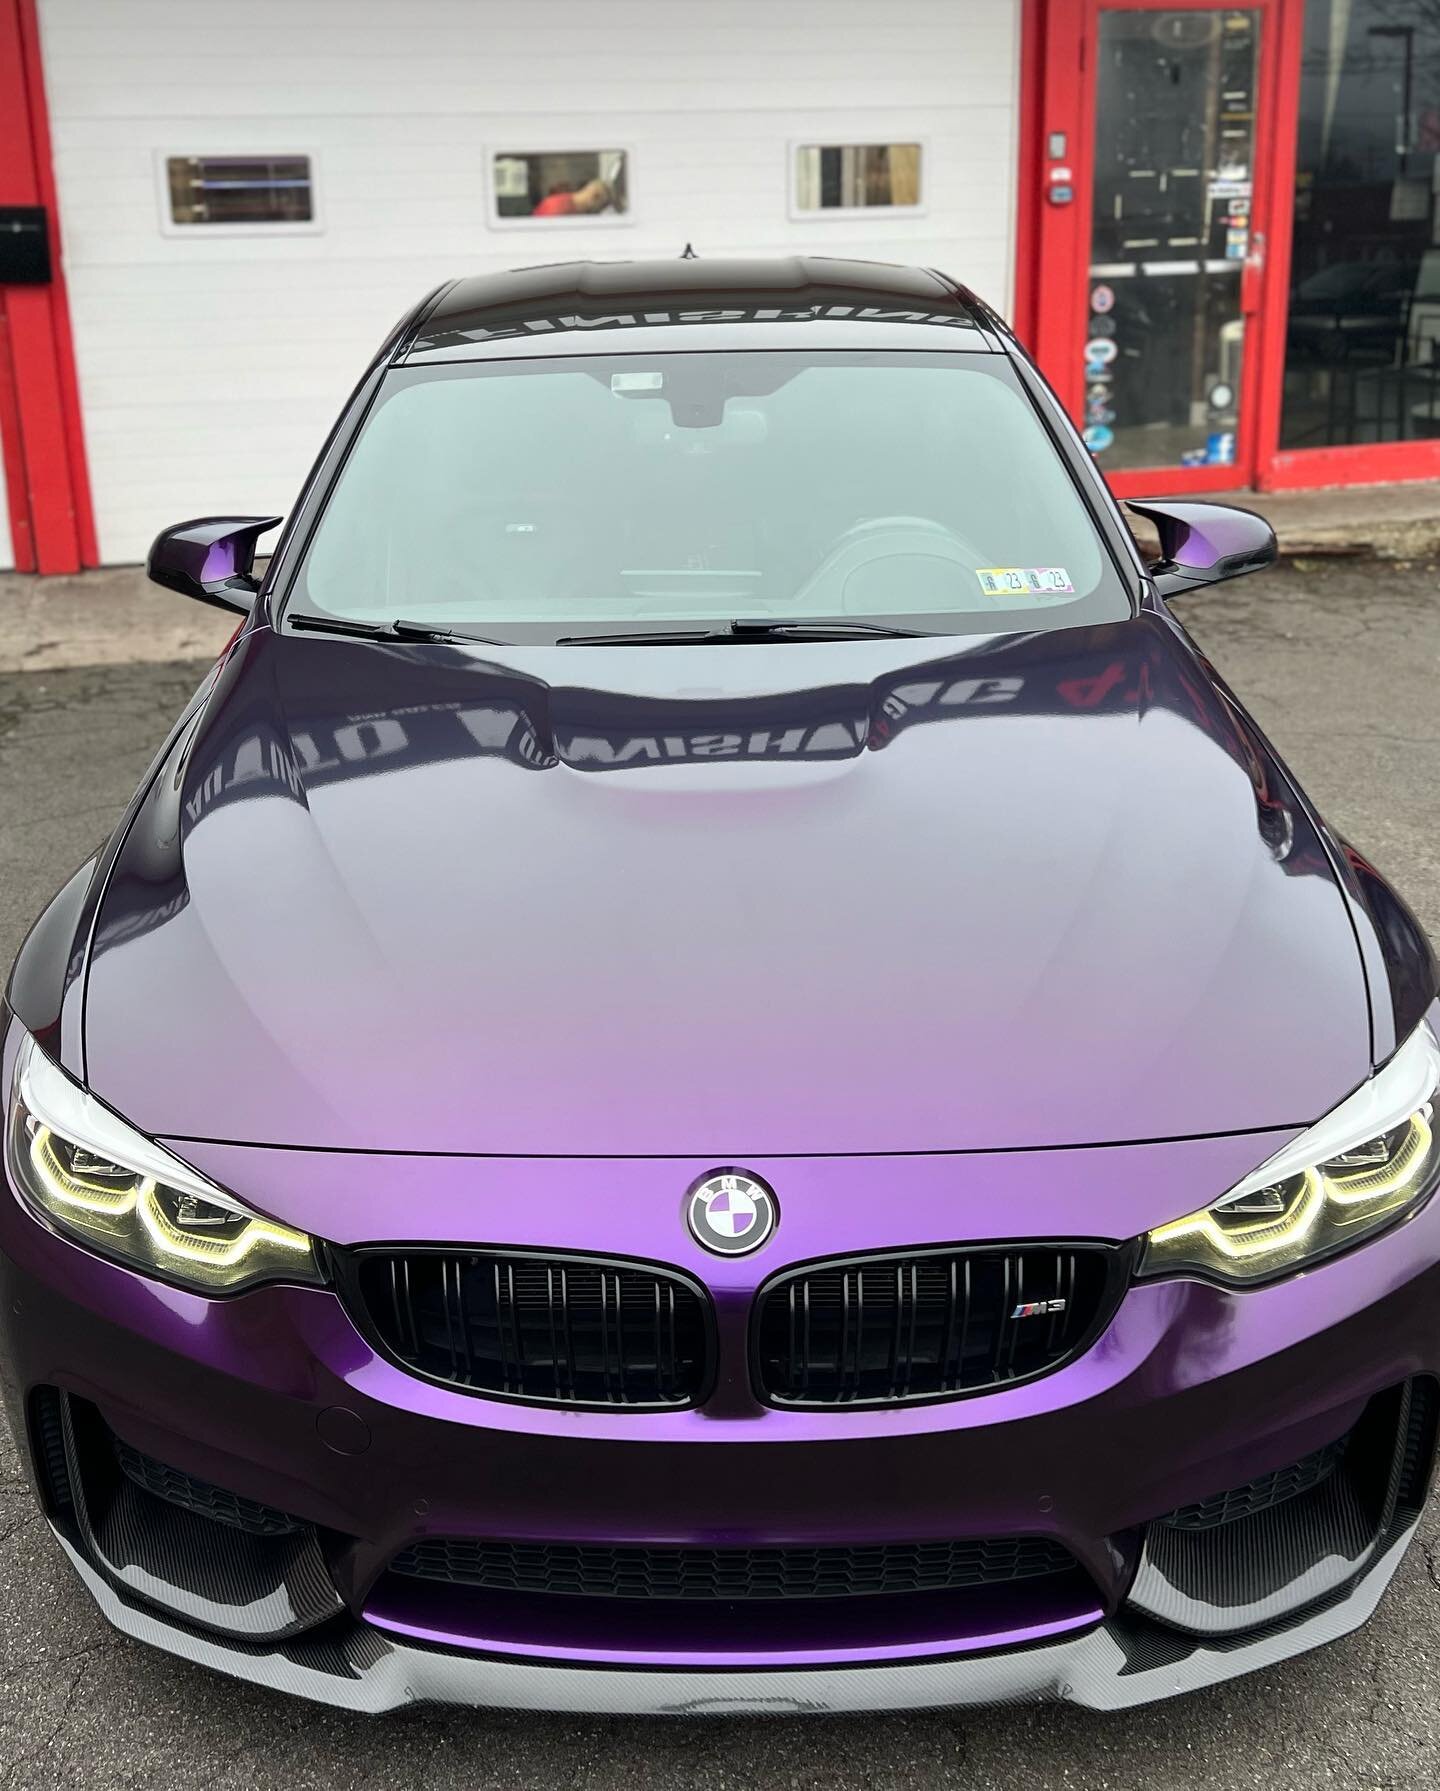 This @kpmfvinyl iridescent really transformed this M3 and we topped it off with @xpel fusion ceramic coating. We are big fans of this look to say the least. #bmw #f80m3 #uniqueautofinishing #kpmf